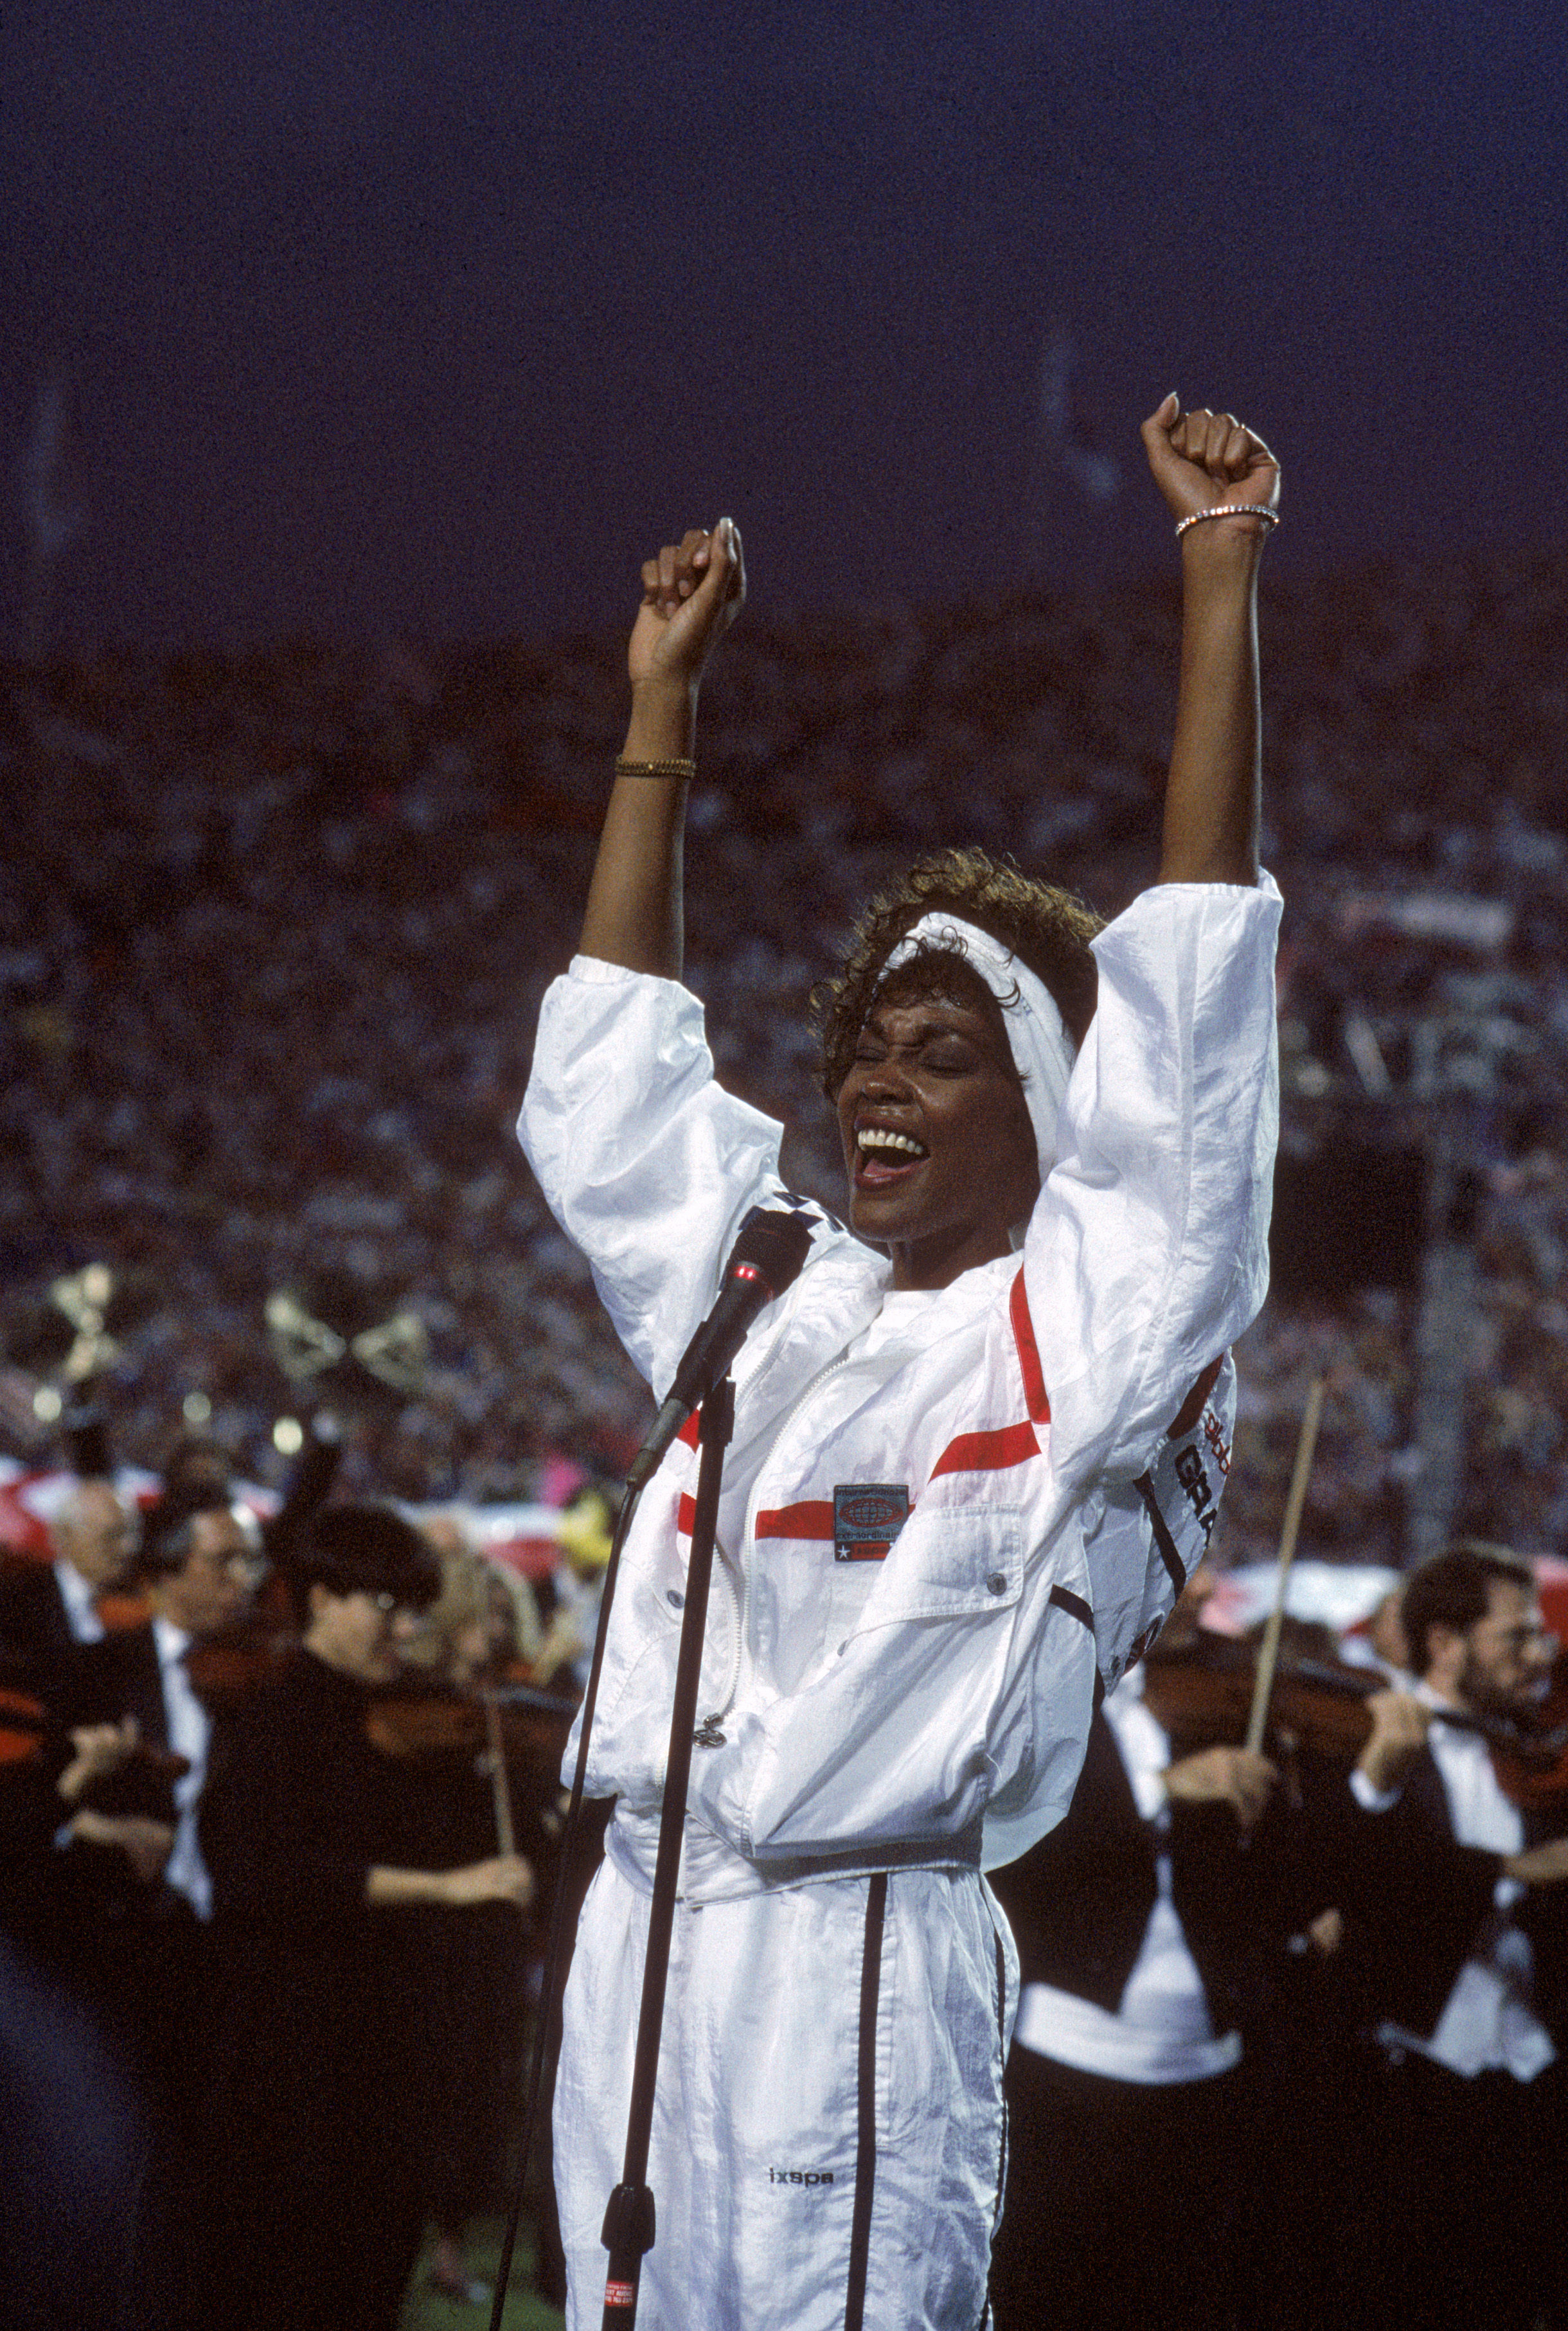 TAMPA, FL - JANUARY 27:  Whitney Houston sings the National Anthem before a game with the New York Giants taking on the Buffalo Bills prior to Super Bowl XXV at Tampa Stadium on January 27, 1991 in Tampa, Florida. The Giants won 20-19. (Photo by George Ro